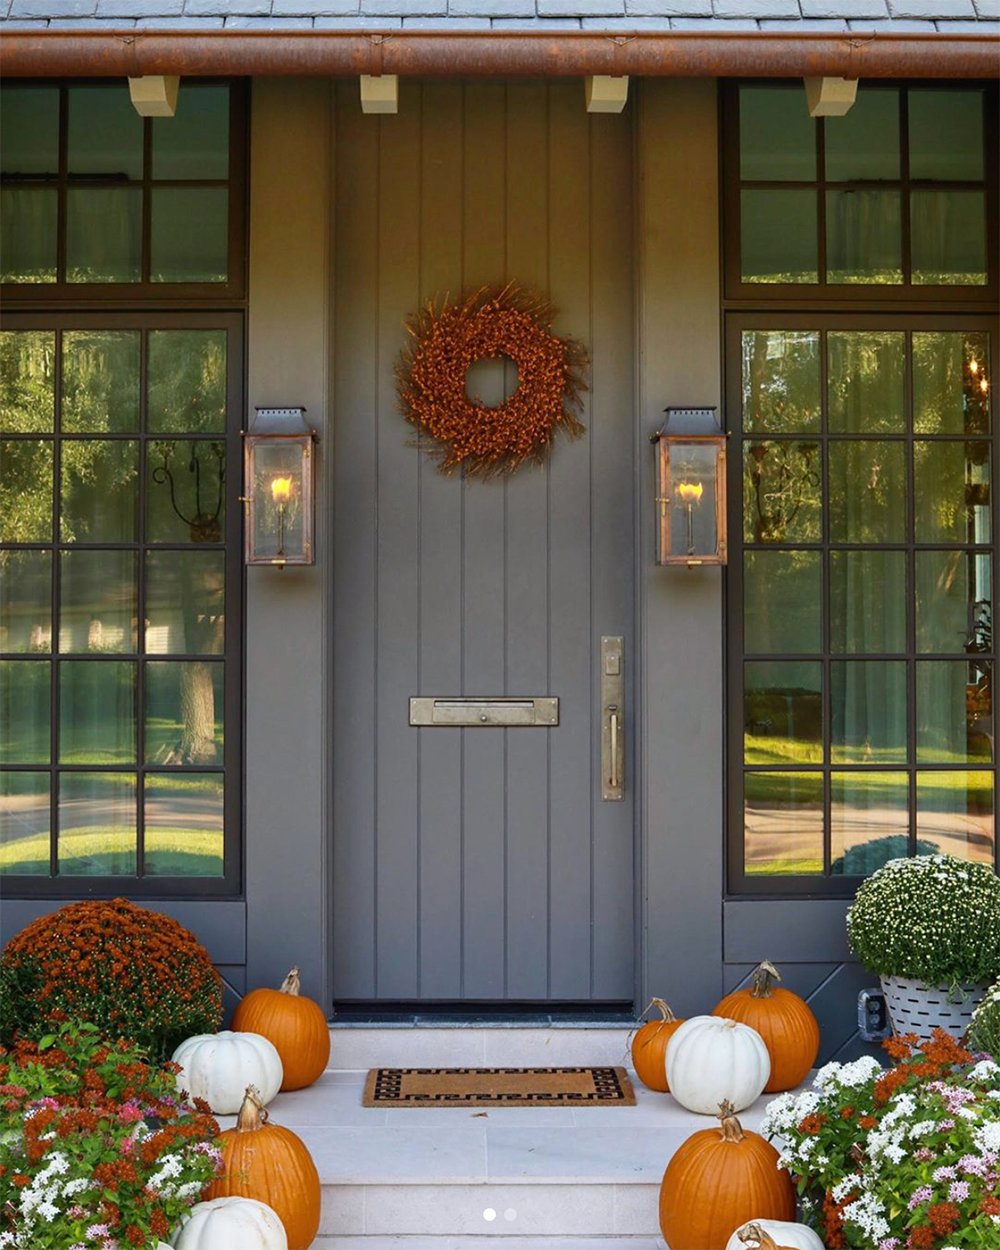 My Favorite Halloween Decor from Fellow Designers & Bloggers - roomfortuesday.com